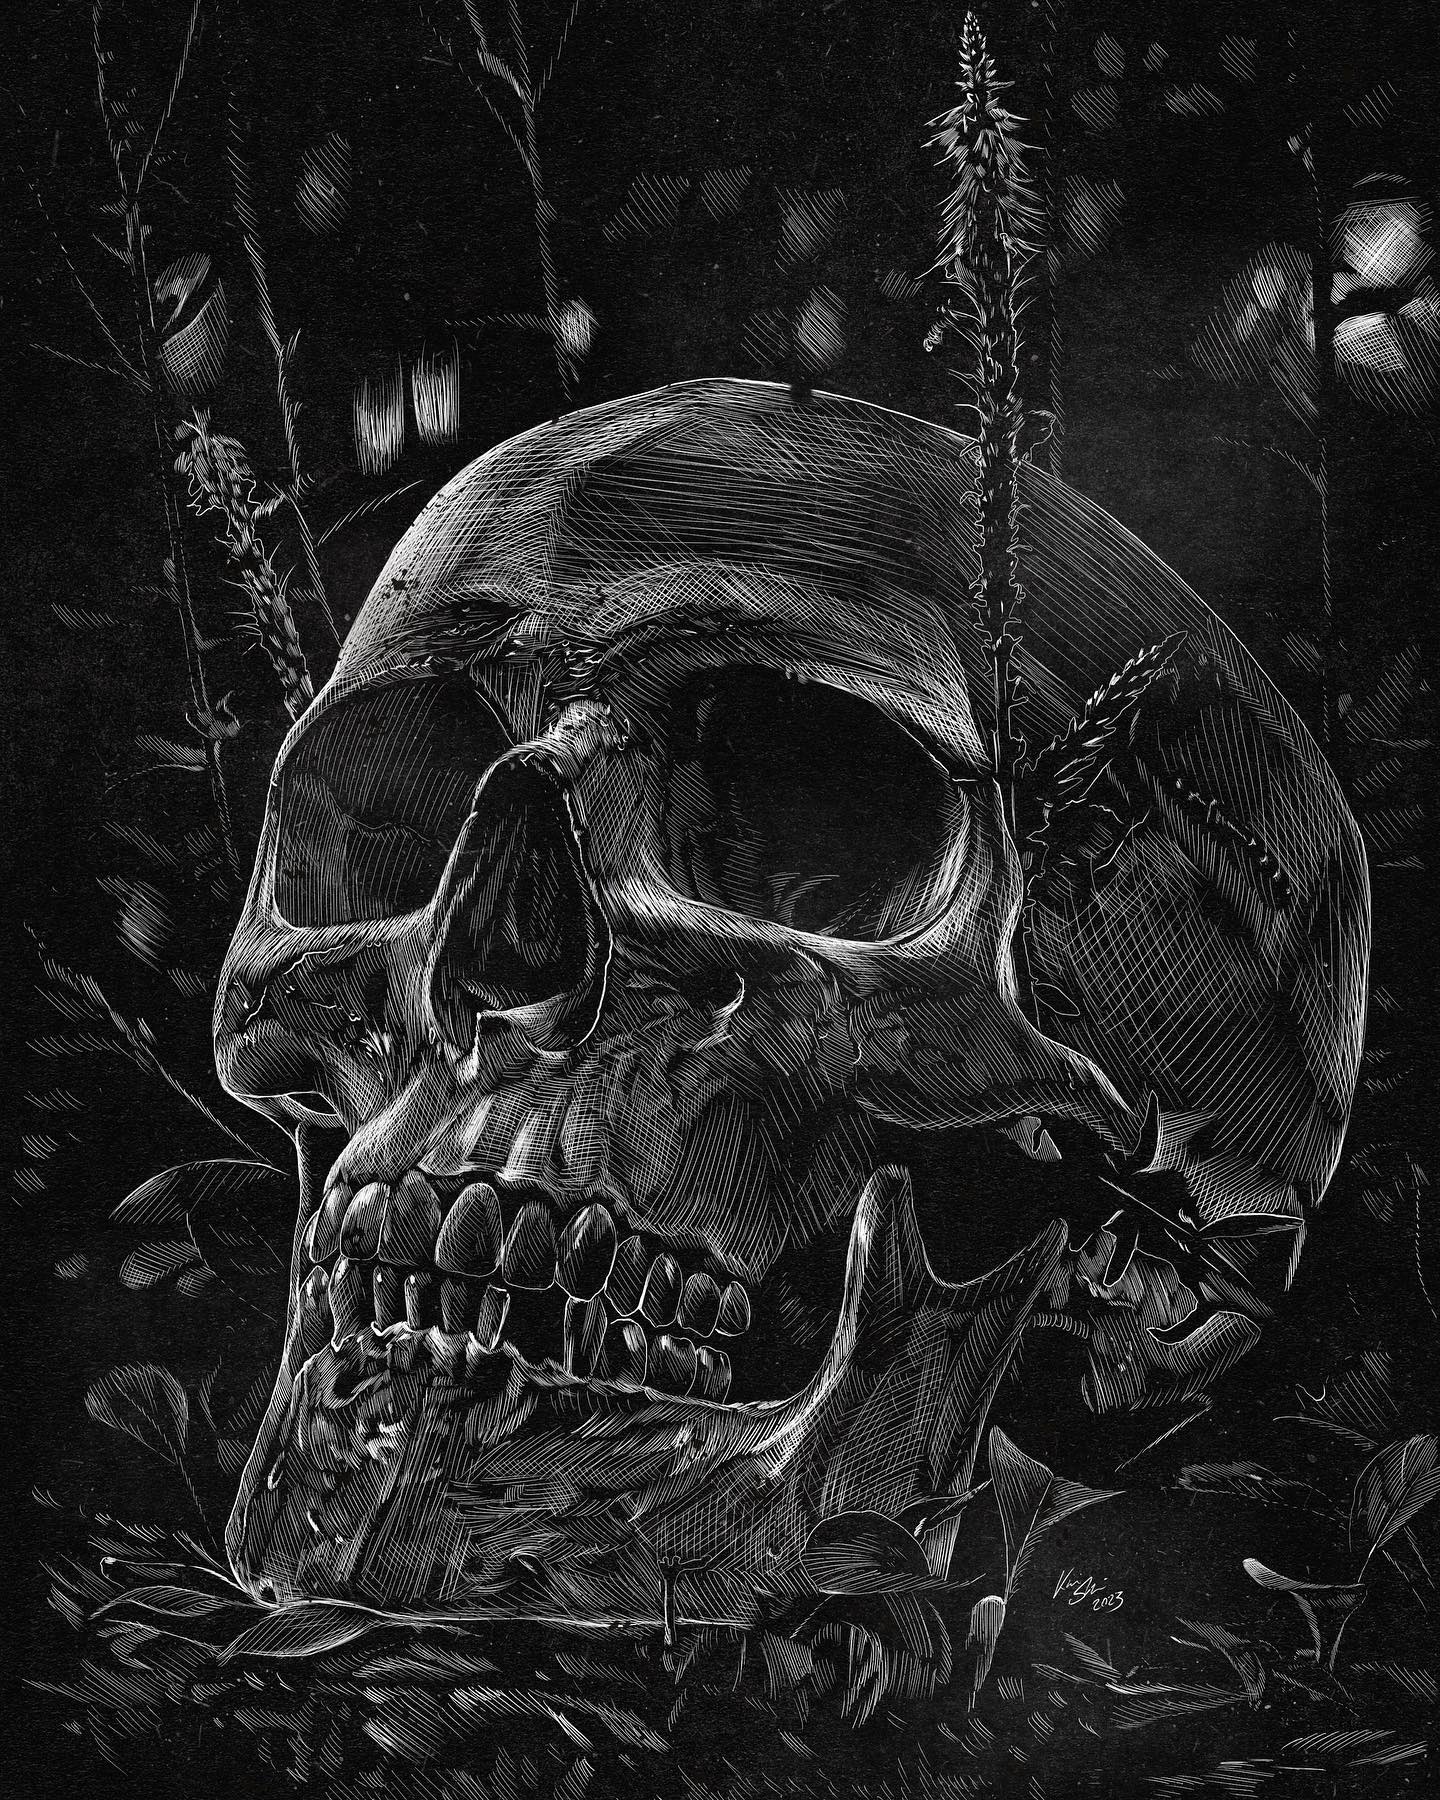 „Life from Death“

Digital Sketch, 297mm x 420mm /300dpi

I used reference photo...